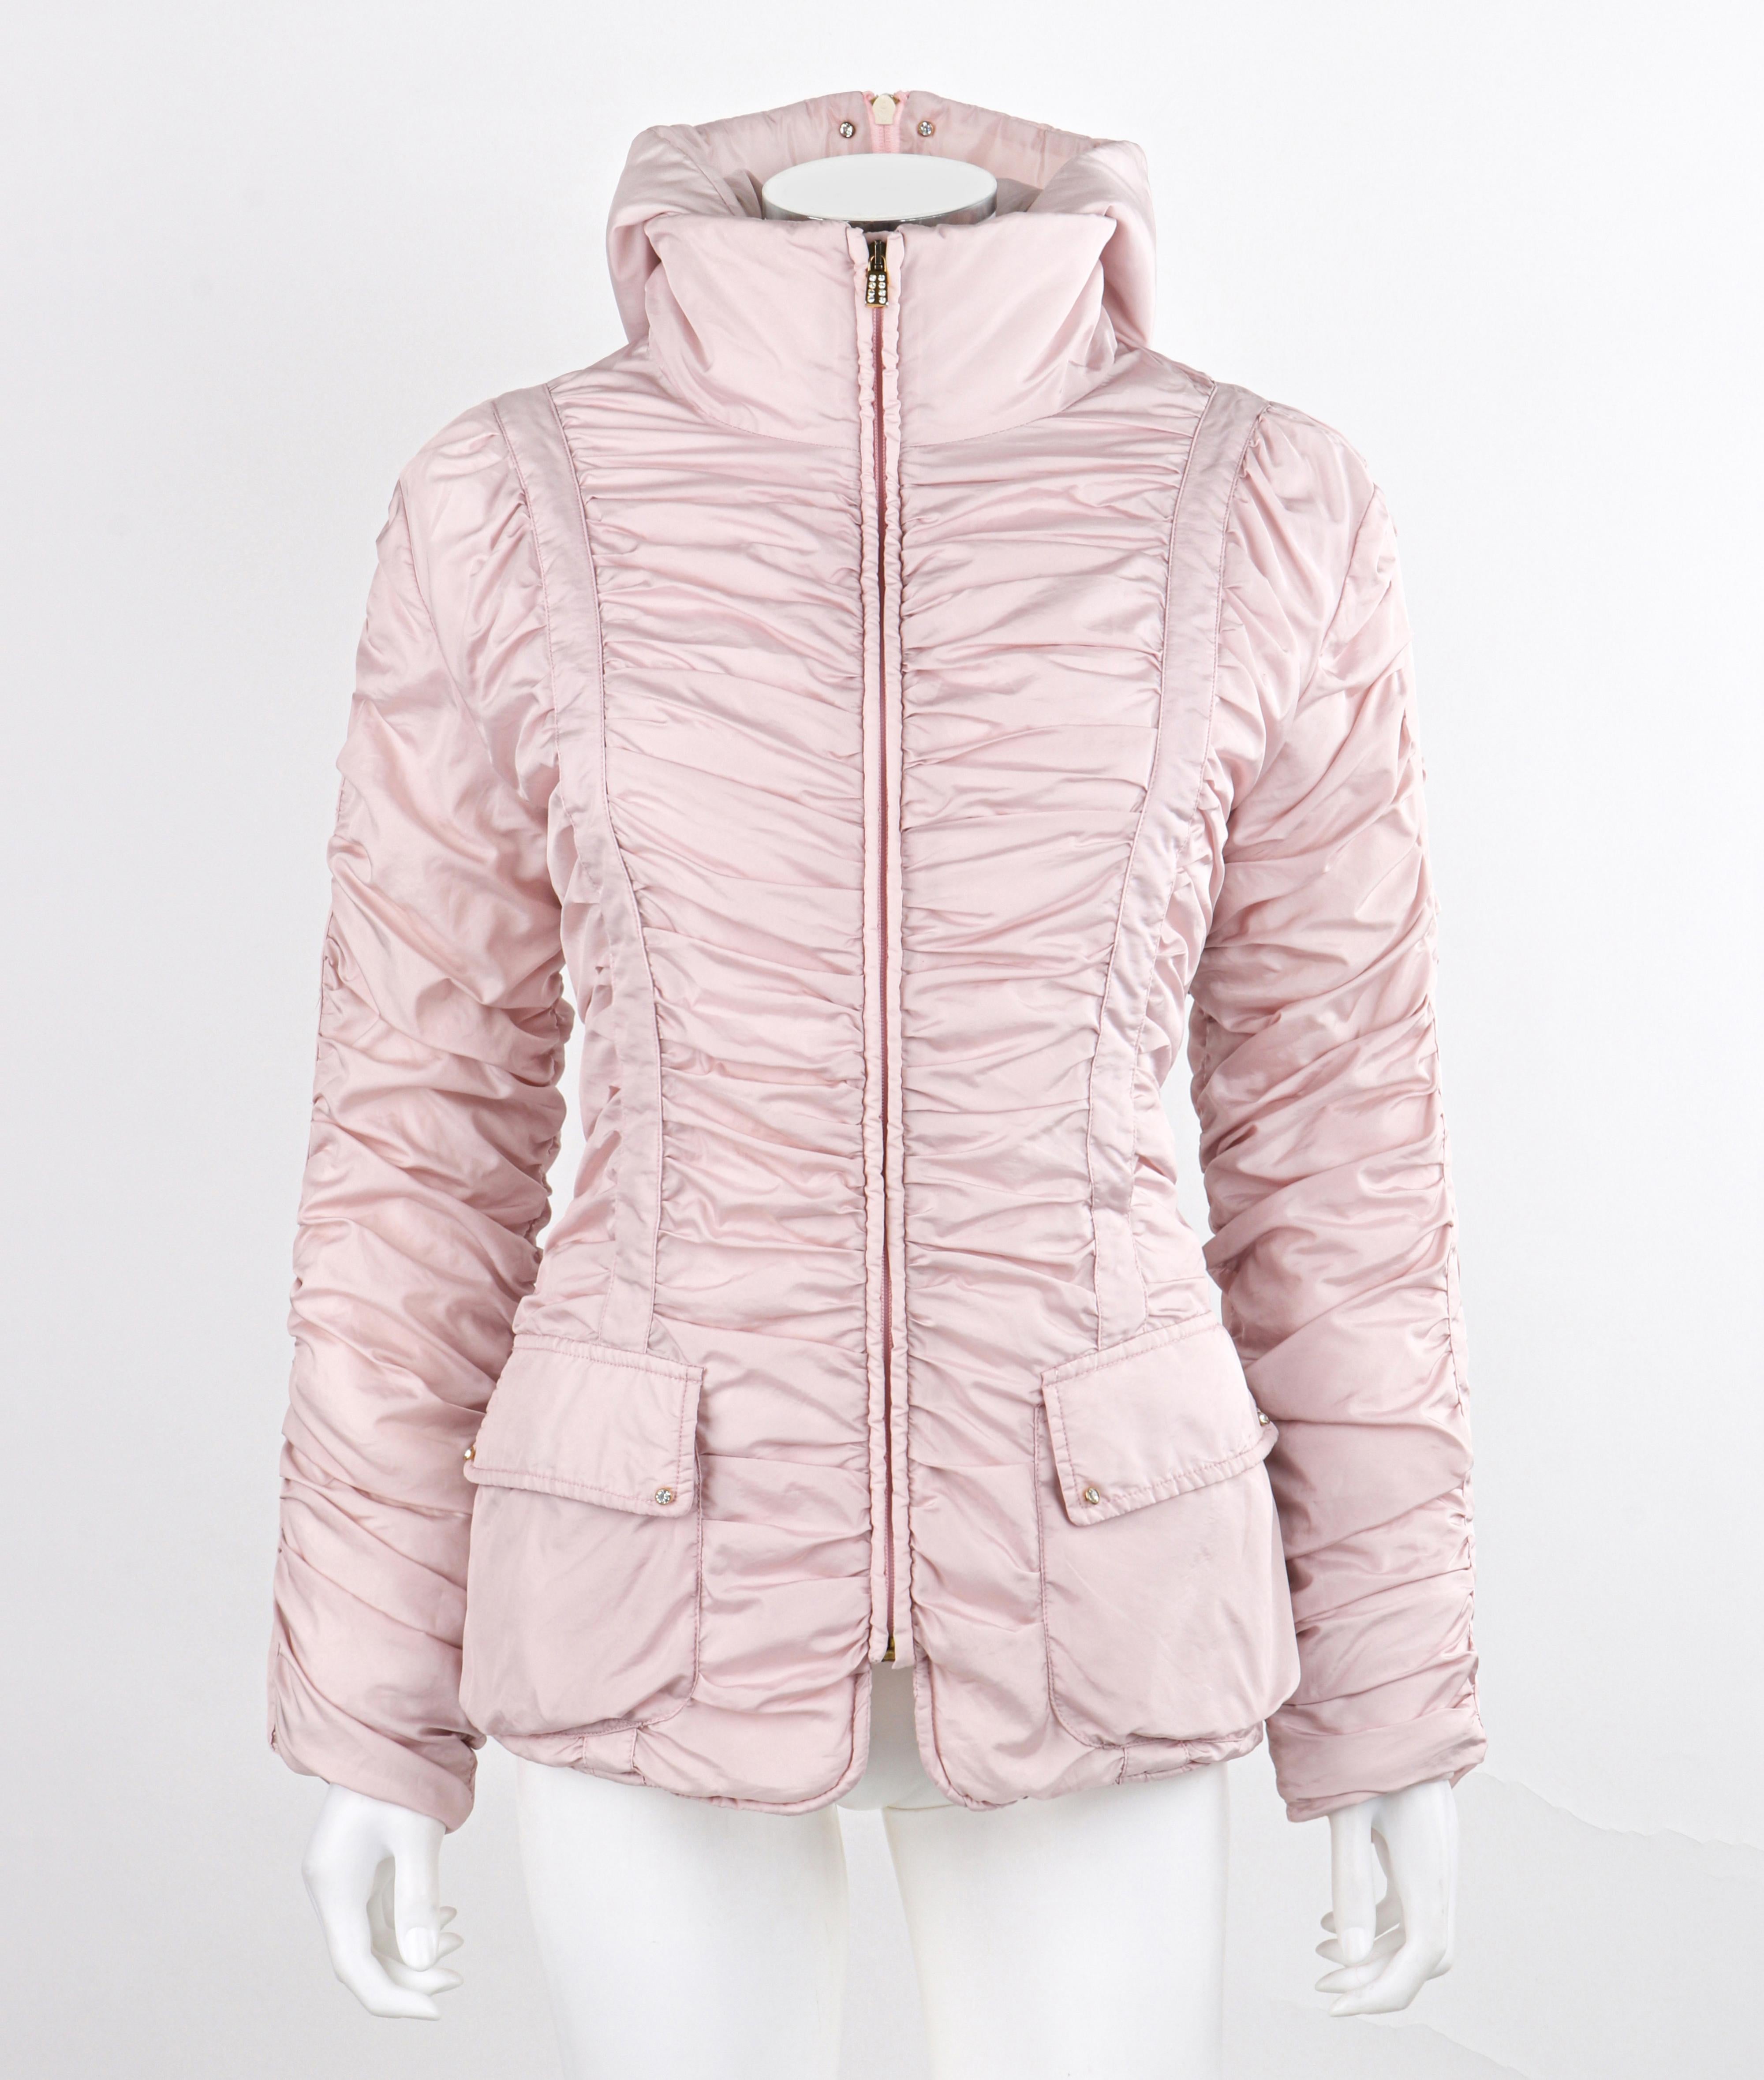 ALEXANDER McQUEEN c.1990's Vtg Pink Ruched Hooded Zip Up Puffer Jacket Coat VTG

Brand / Manufacturer: Alexander McQueen
Circa: 1990's
Designer: Alexander McQueen
Style: Puffer Coat
Color(s): Pink
Lined: Yes
Unmarked Fabric (feel of): Polyester